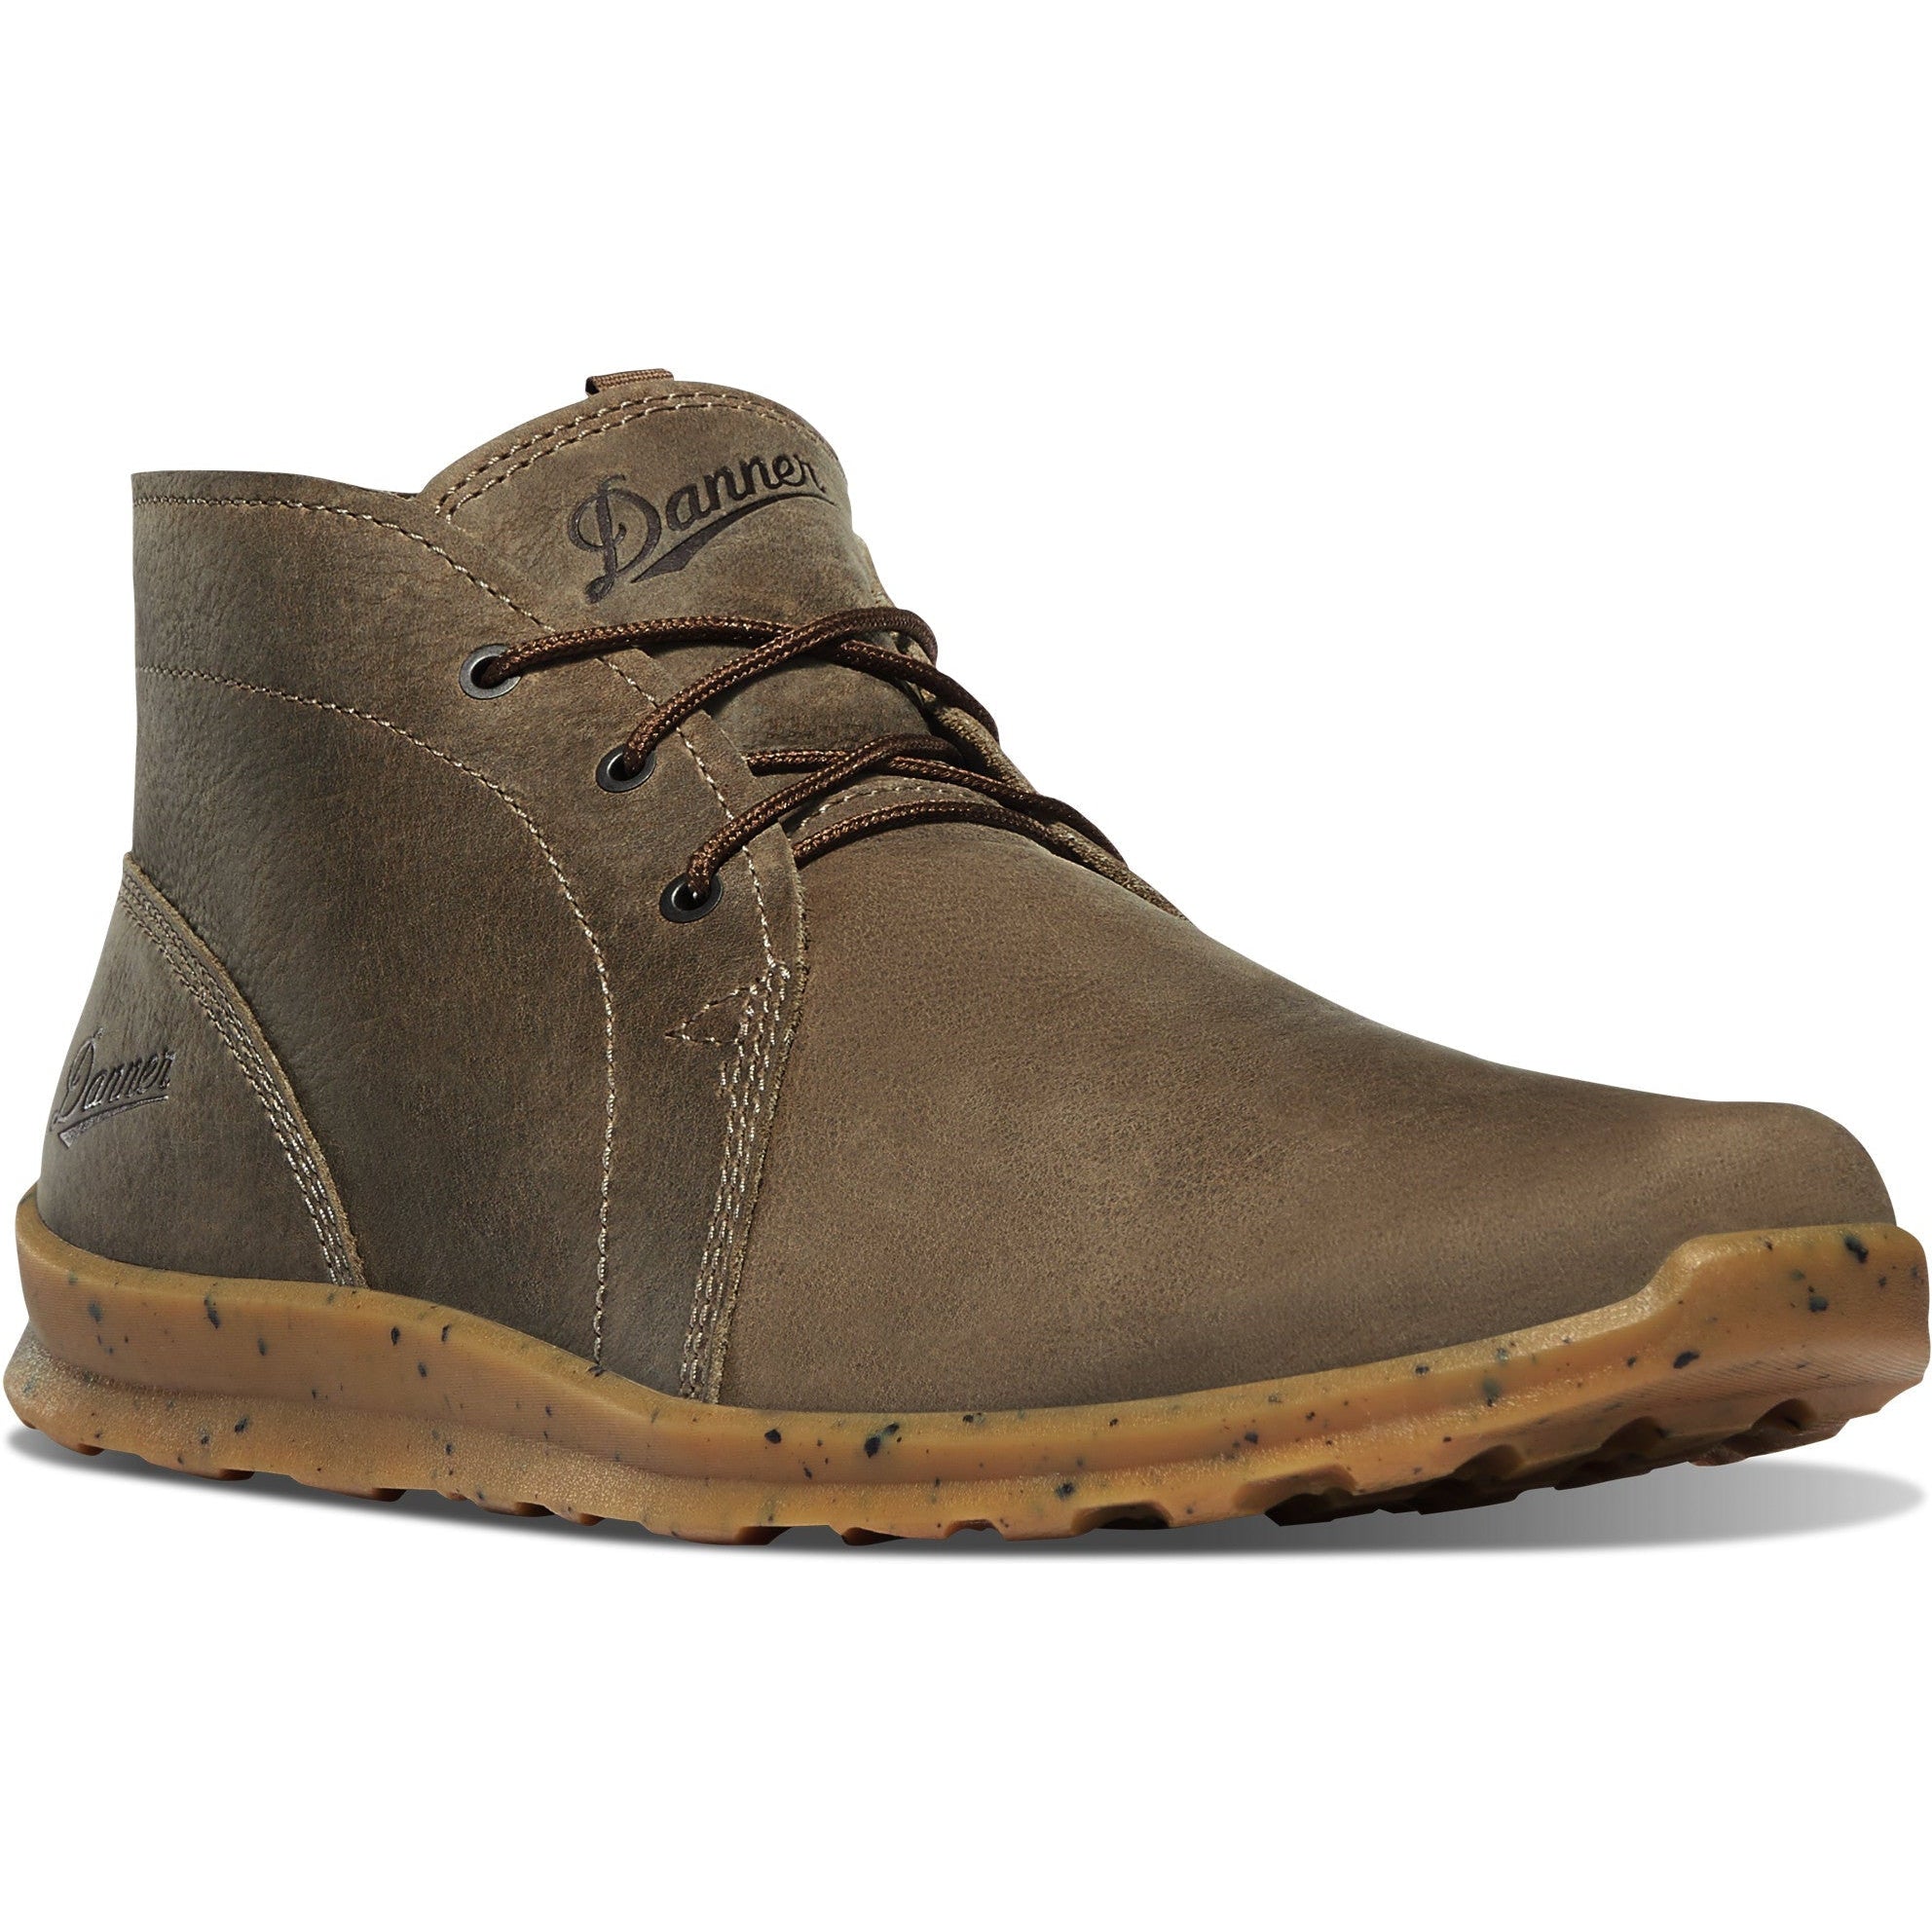 Danner Men's Forest Chukka 4.5" Leather Lifestyle Boot - 37640 7 / Medium / Brown - Overlook Boots